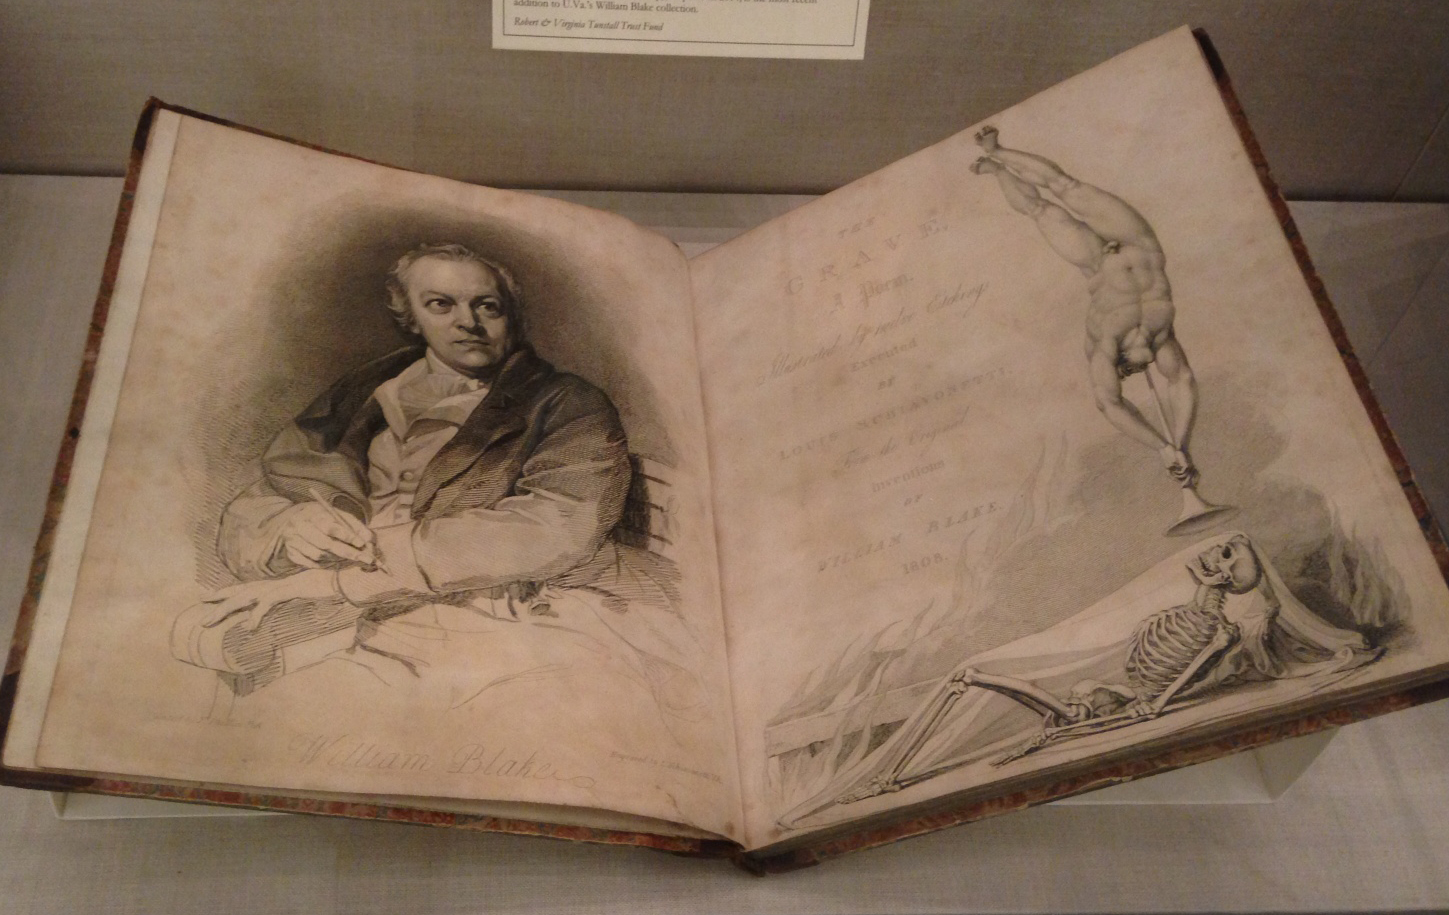 The engraved frontispiece and title page to Robert Blair, The Grave: a poem (London: T. Bensley for R. H. Cromek, 1808), illustrated by William Blake. The portrait of Blake at the age of 48 was engraved after a painting by Thomas Phillips.